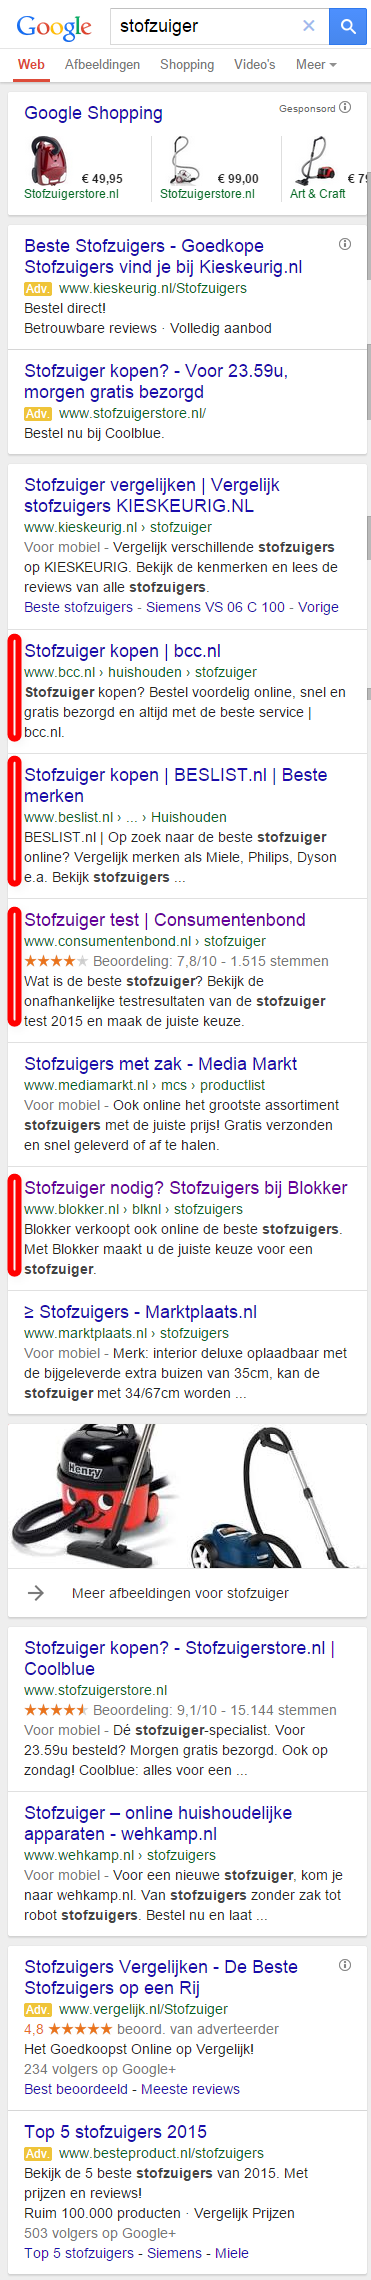 mobile search: stofzuiger